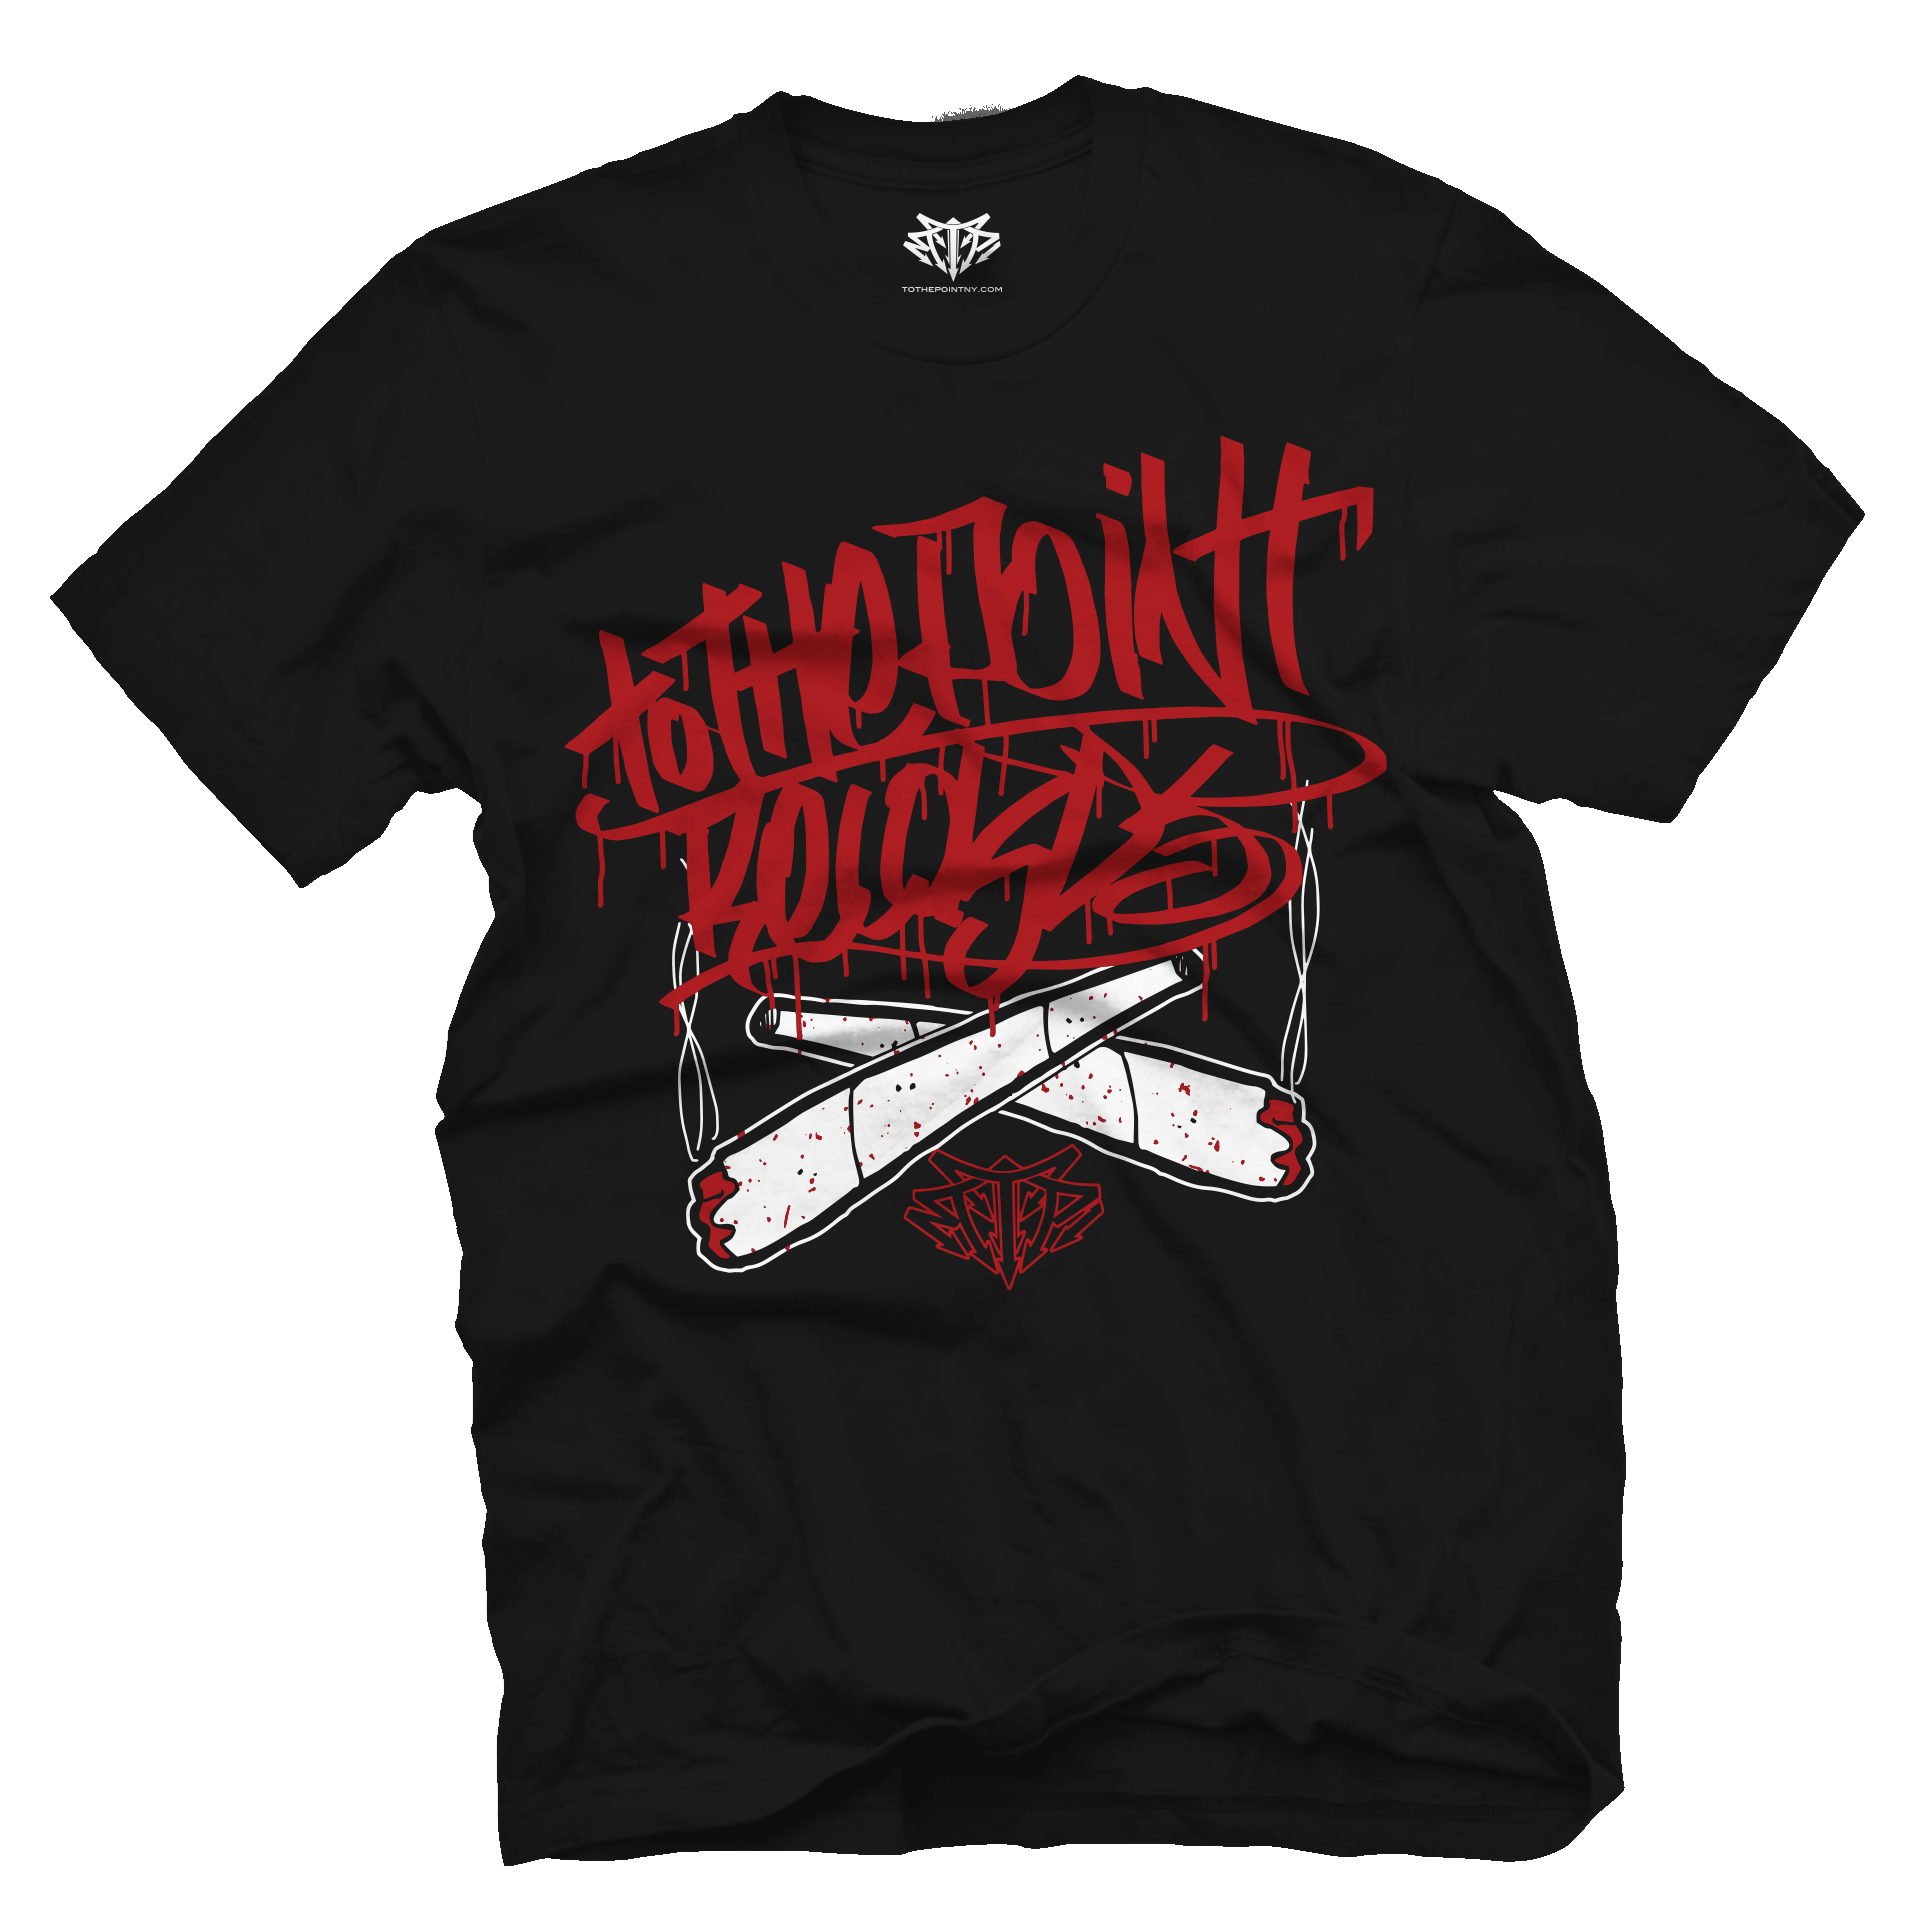 To The Point Records Joints - T Shirt